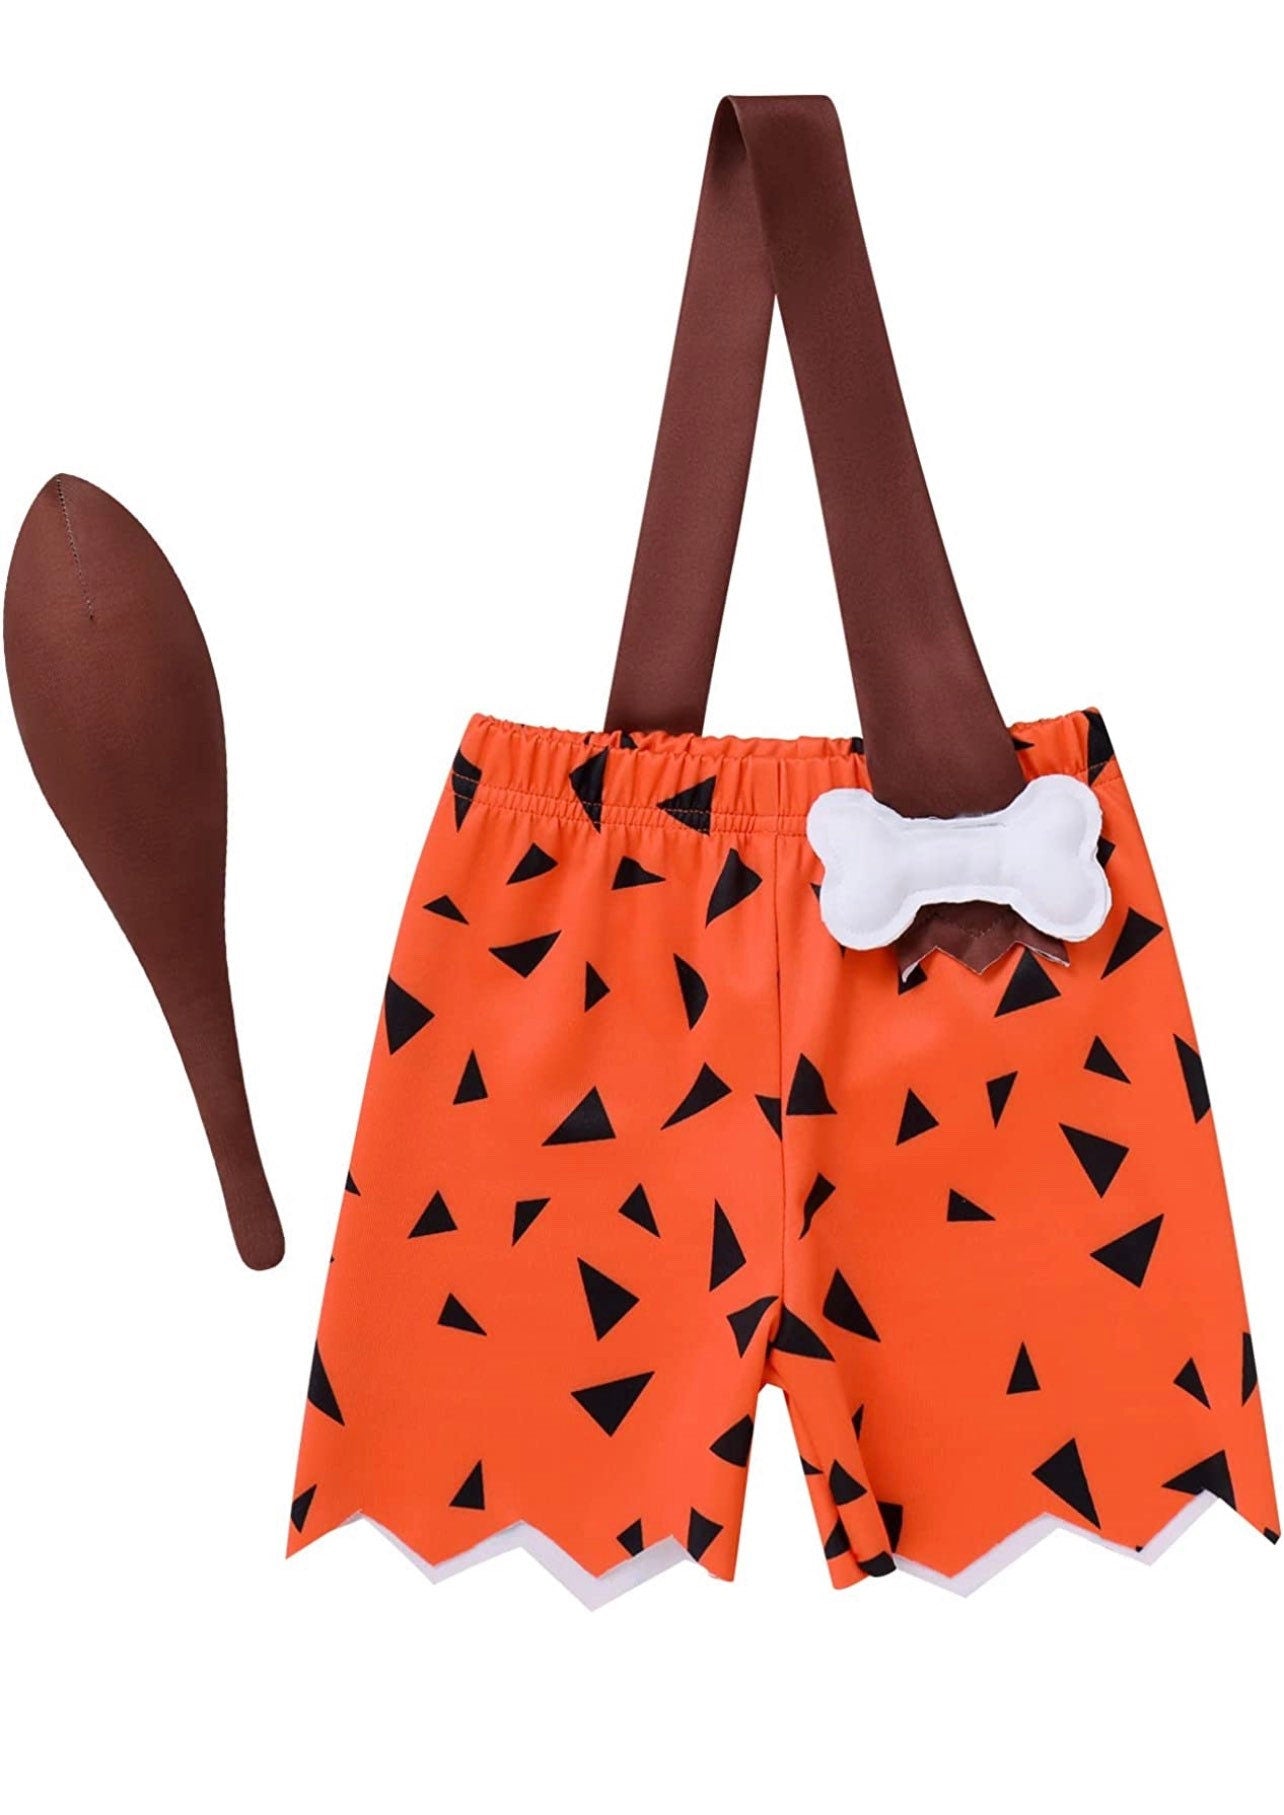 Baby Pebbles Flintstone Costume Historical Stone Age Cave Man Outfits for Baby Girls Boys Caveman Cavegirl Party Photo Shoot